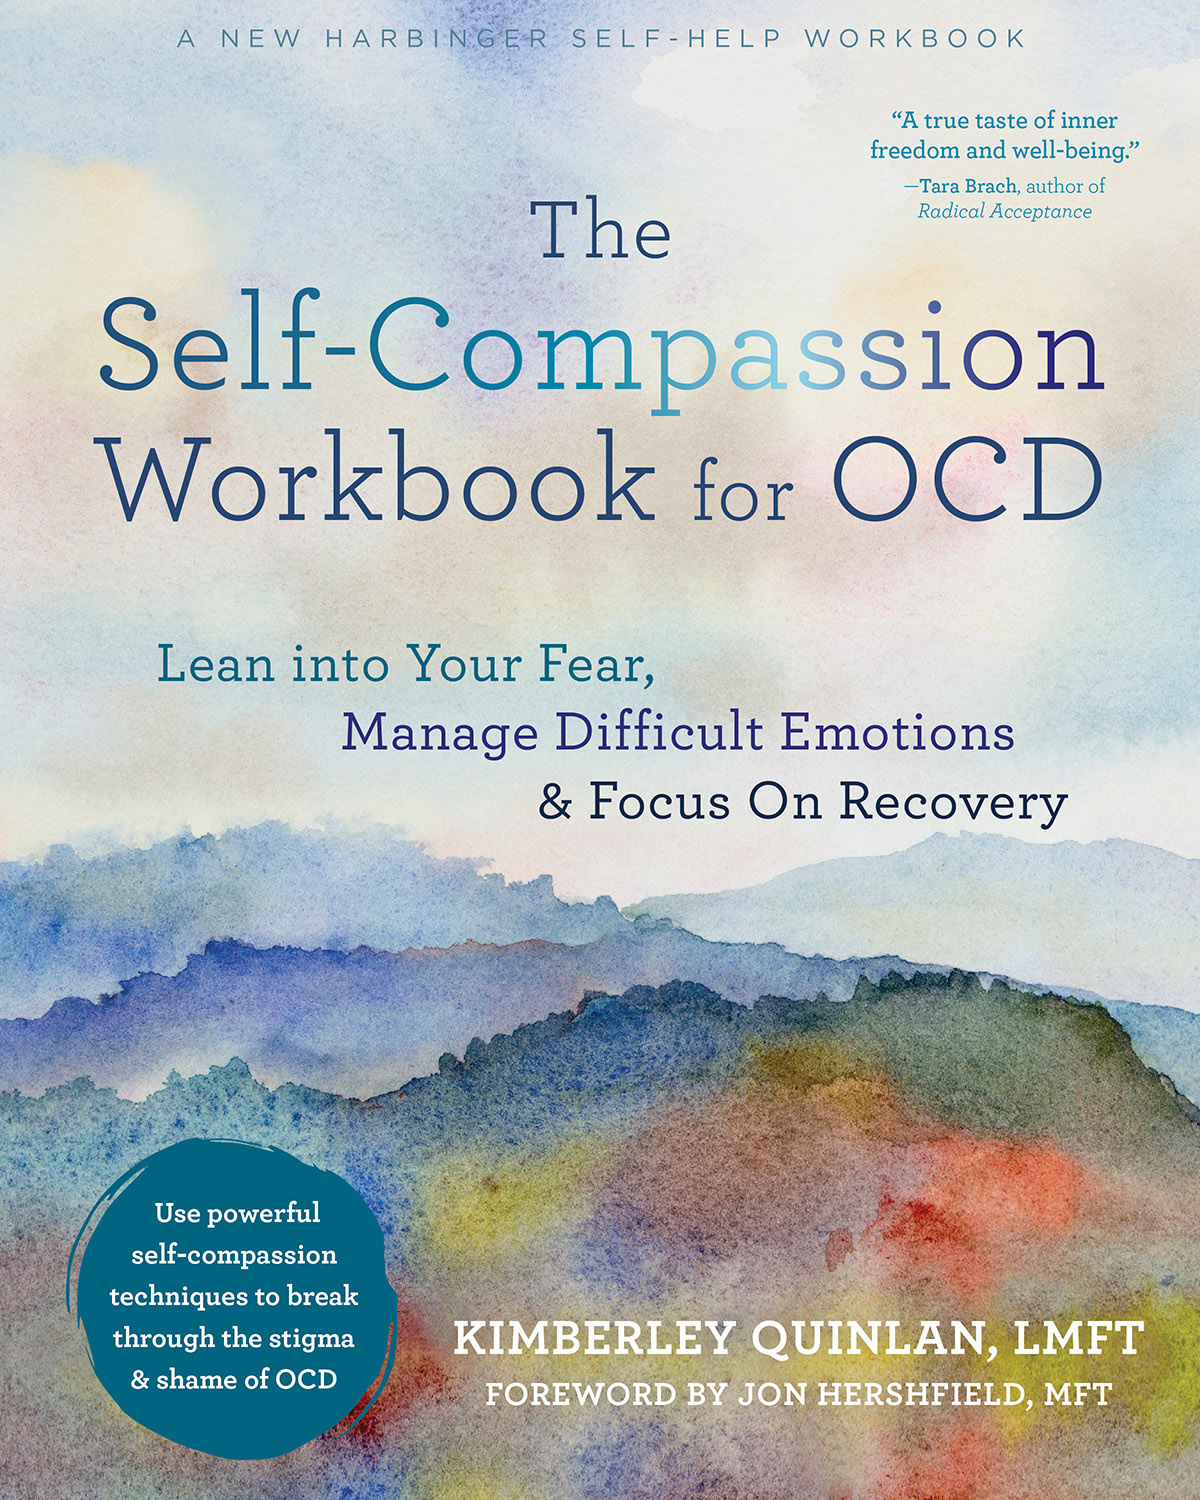 Kimberley Quinlan is a wonderful advocate for self-compassion Having met her - photo 1